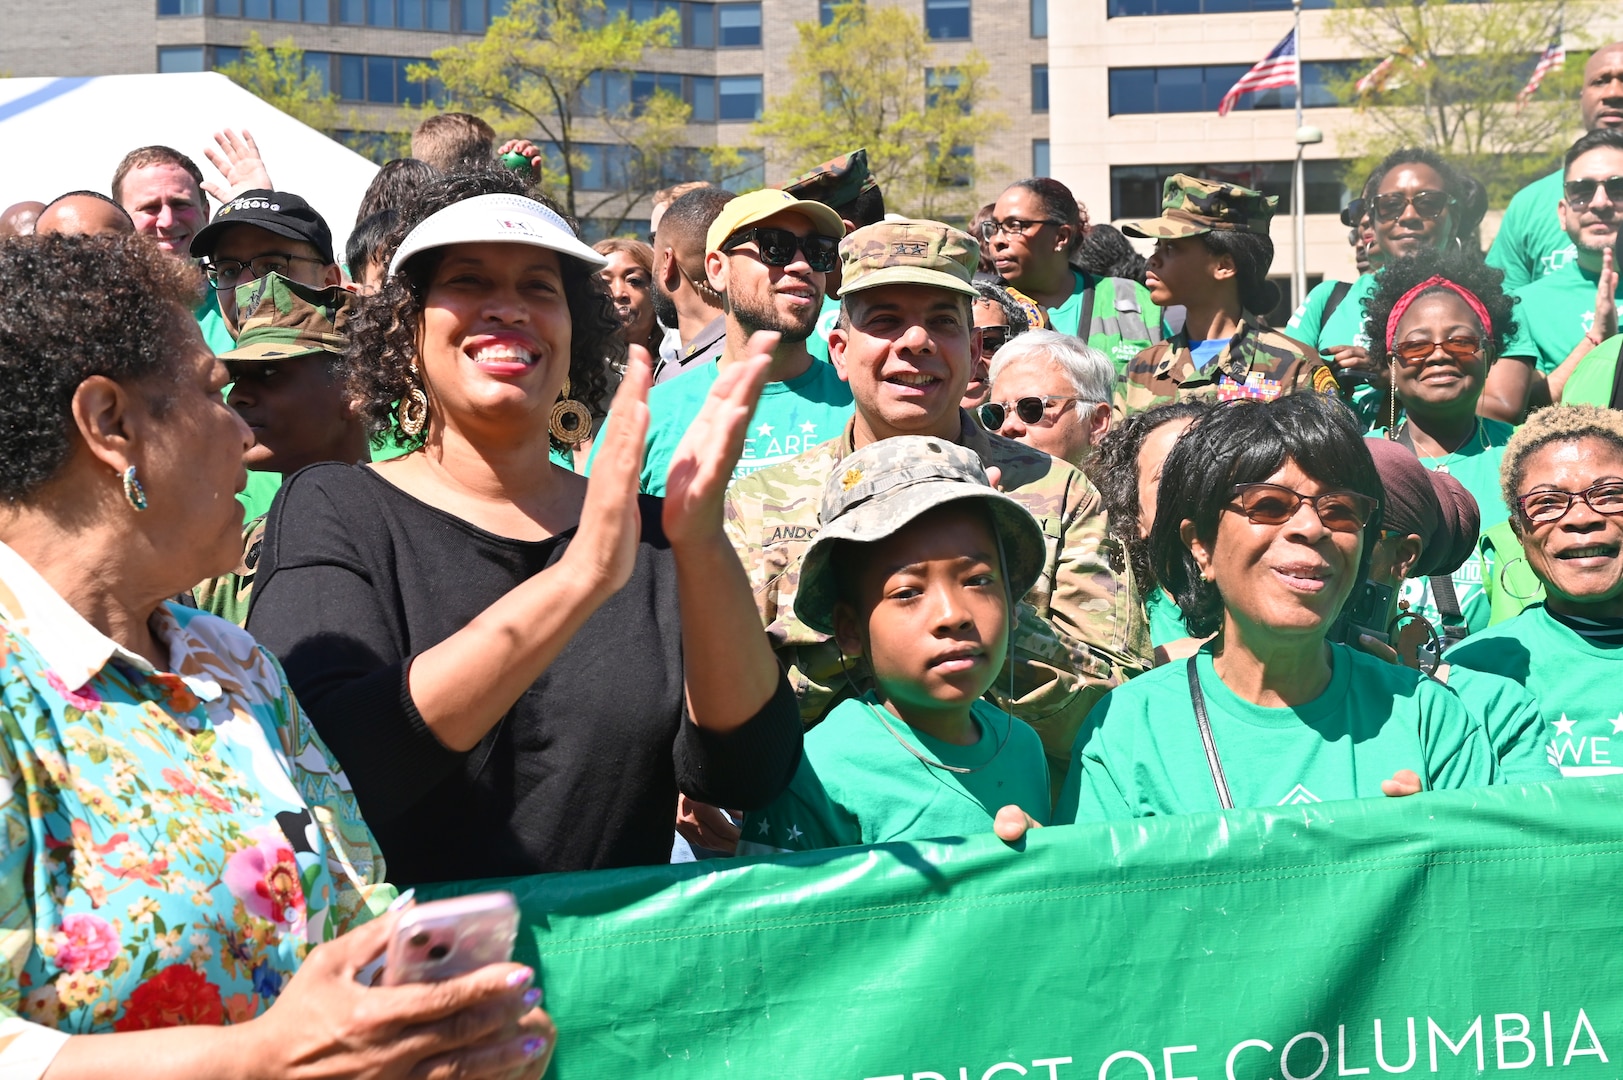 Maj. Gen. John C. Andonie, Commanding General (interim), D.C. National Guard, and the 257th Army Band joined Mayor Muriel Bowser for the 2024 Emancipation Day Parade and concert.  The event which commemorates the end of slavery is organized by the Mayor's Office of Community Affairs (MOCA).  On April 16, 1862, President Abraham Lincoln signed the District of Columbia Compensated Emancipation Act, ending slavery in the District of Columbia.  Passage of the law came over 8 months before President Lincoln issued his Emancipation Proclamation.